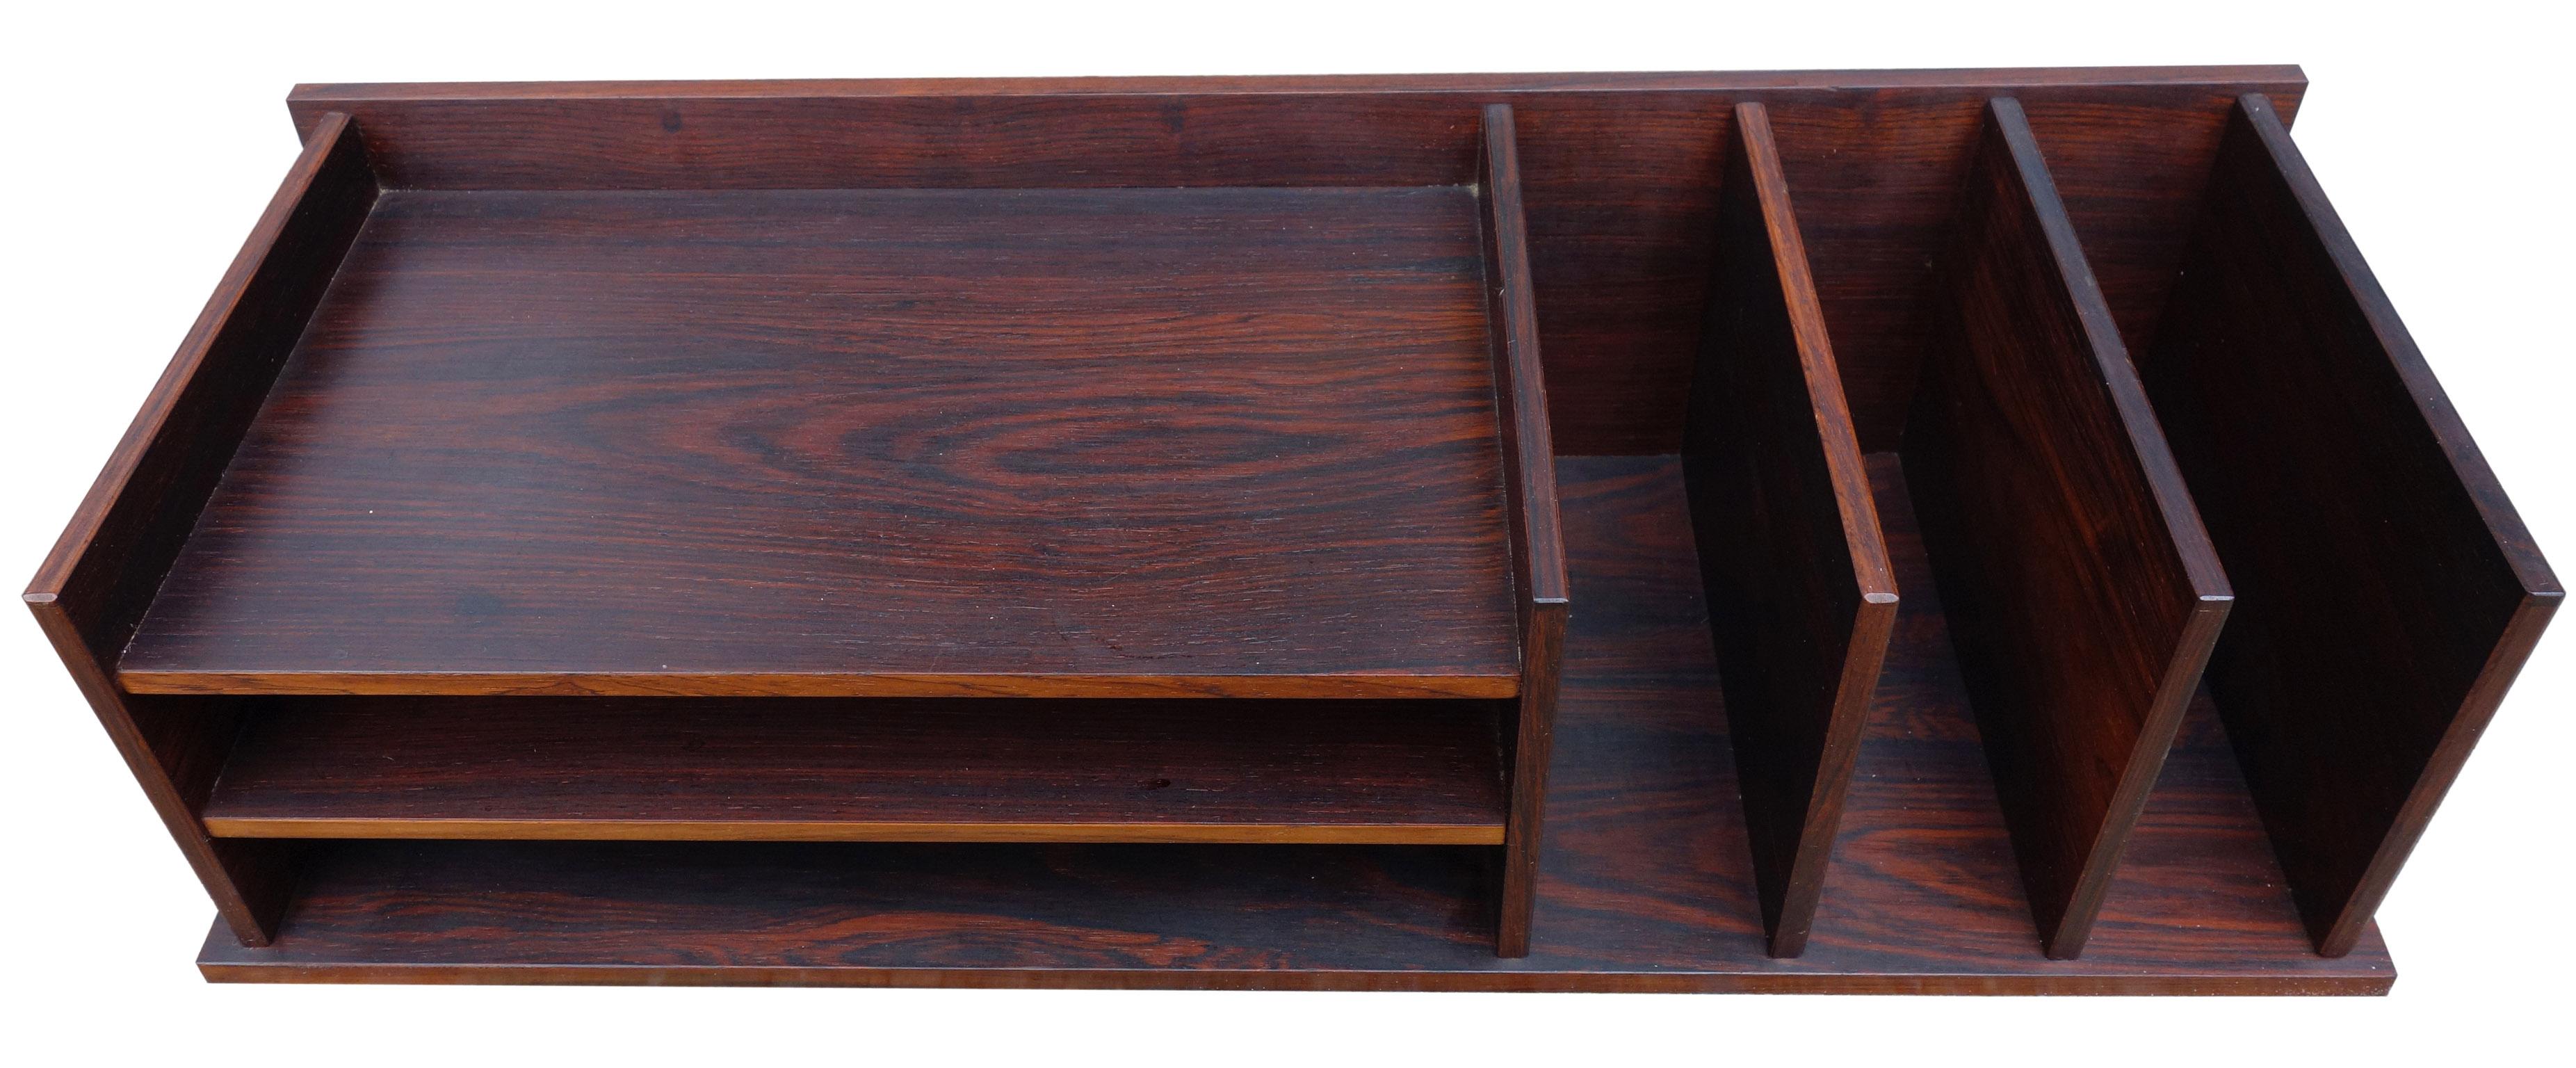 Wonderful addition to your midcentury Scandinavian office. Solid rosewood construction.